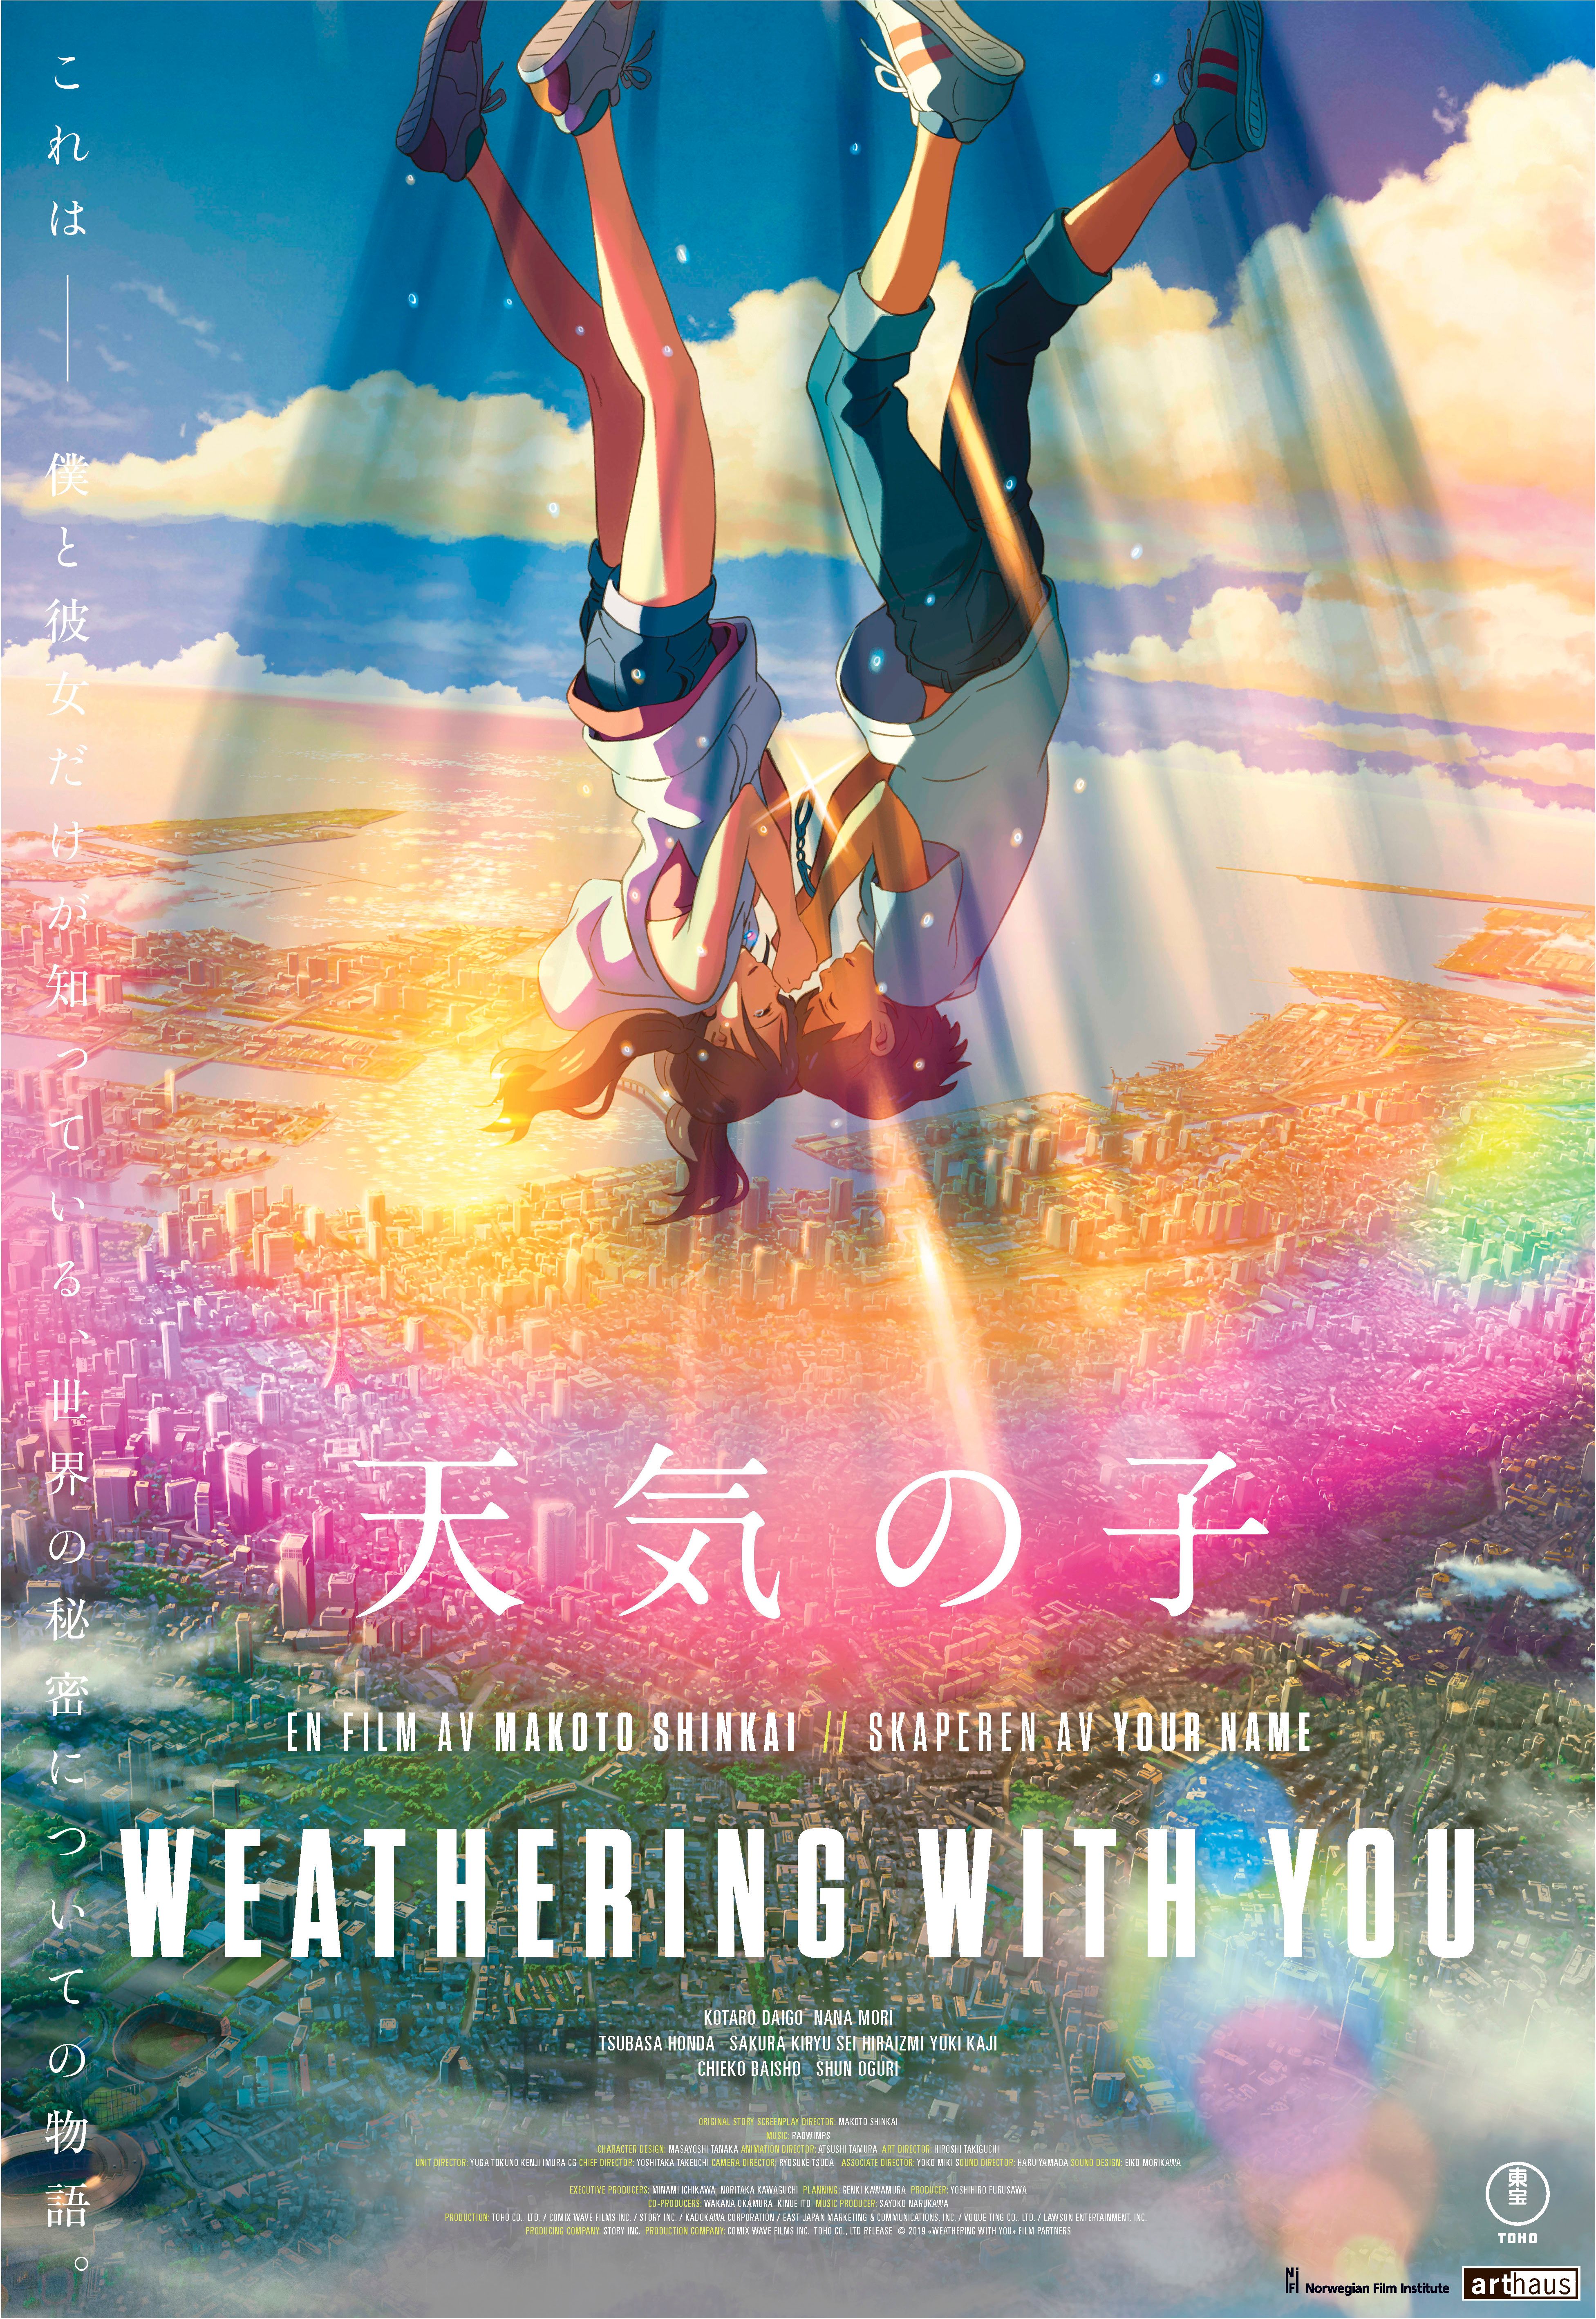 Weathering with You logo